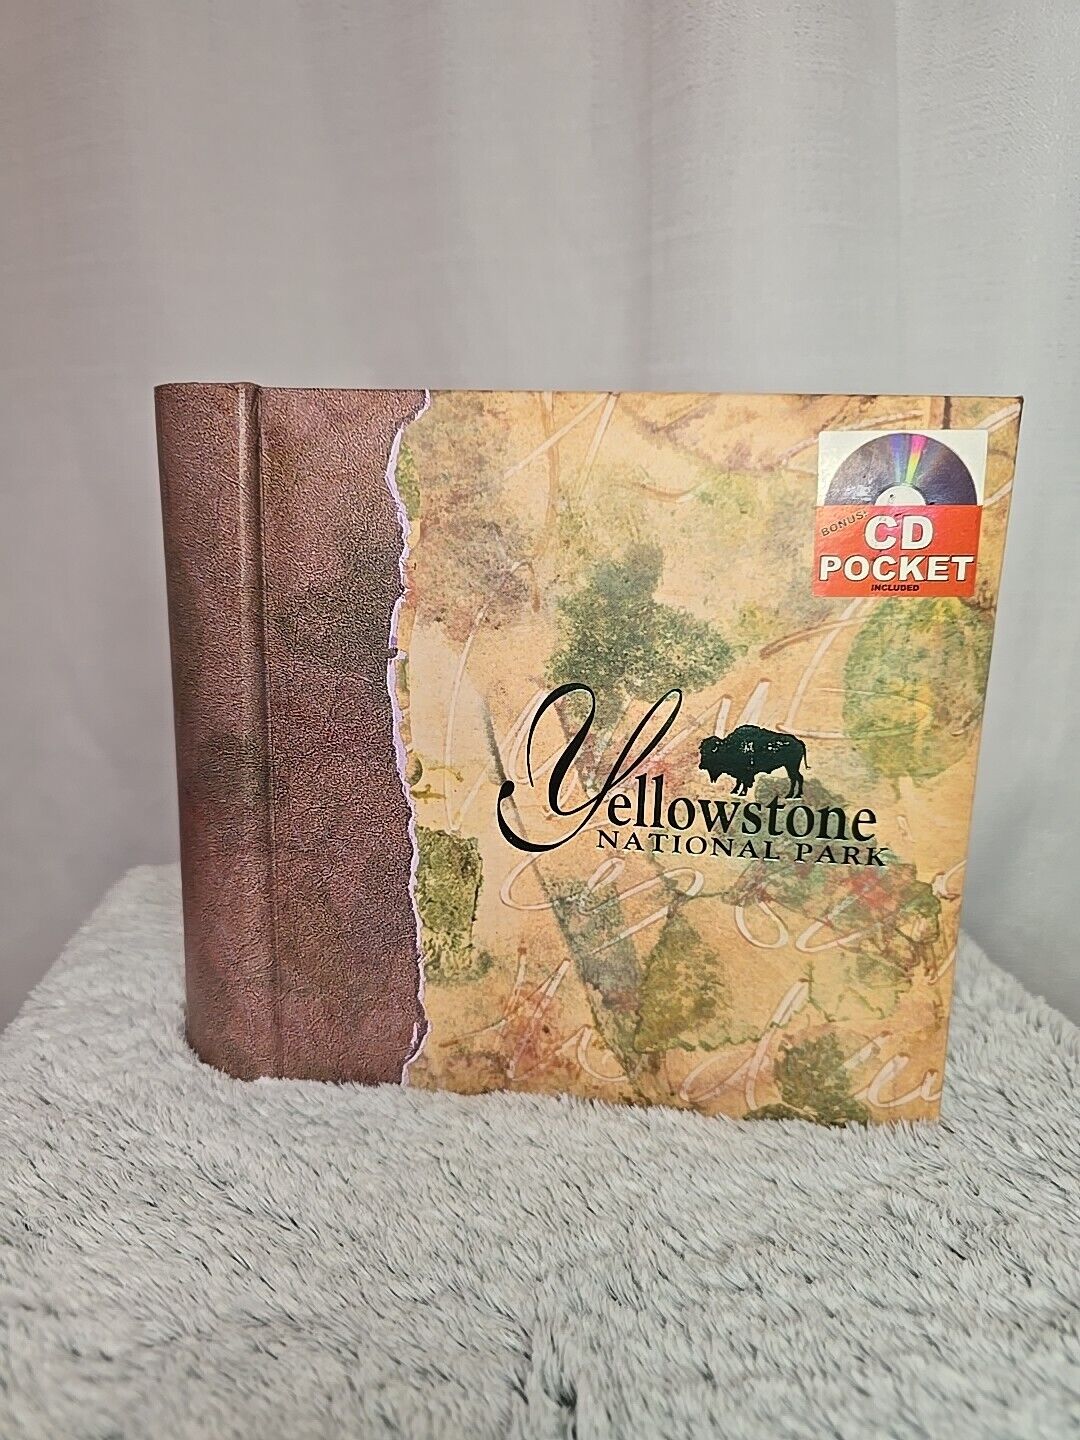 Yellowstone Park Vintage Souvenir Photo Album With CD Pocket Recycled Paper Made